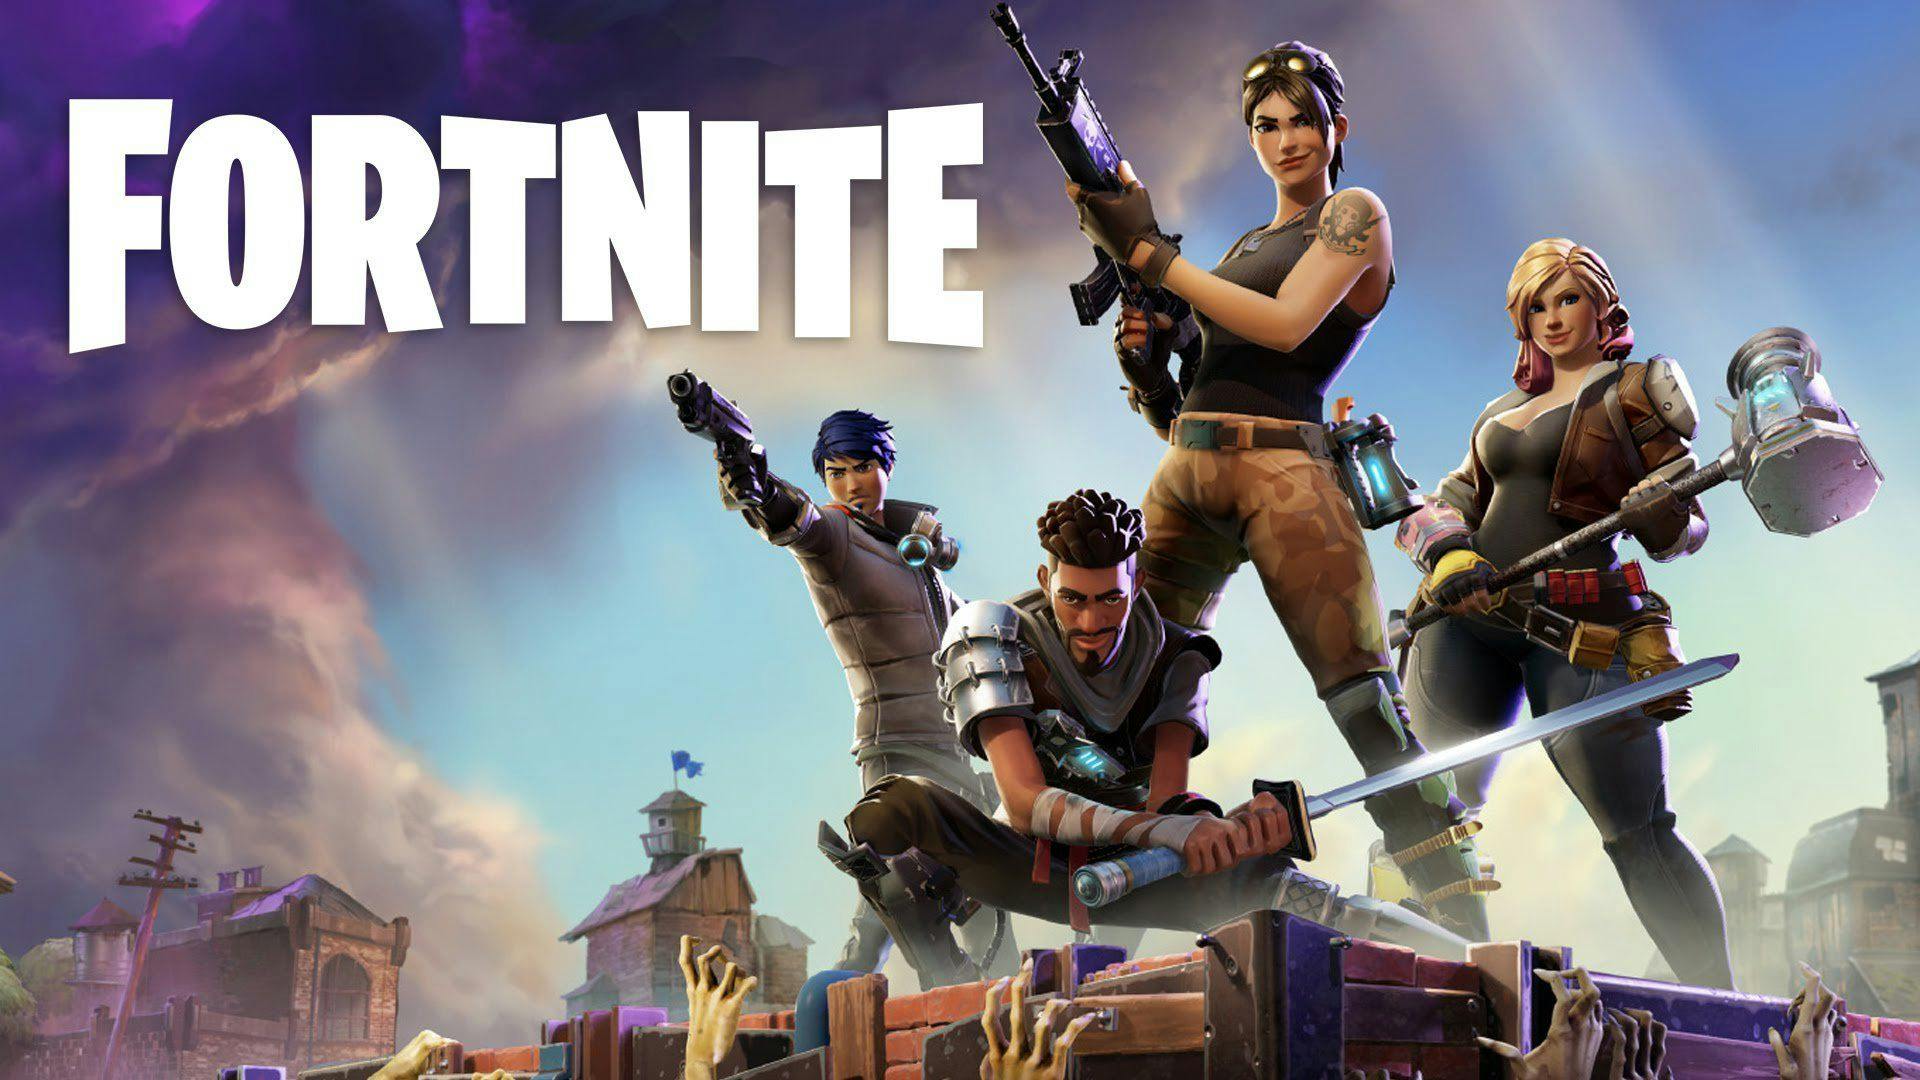 Do you need Xbox Live to play Fortnite?